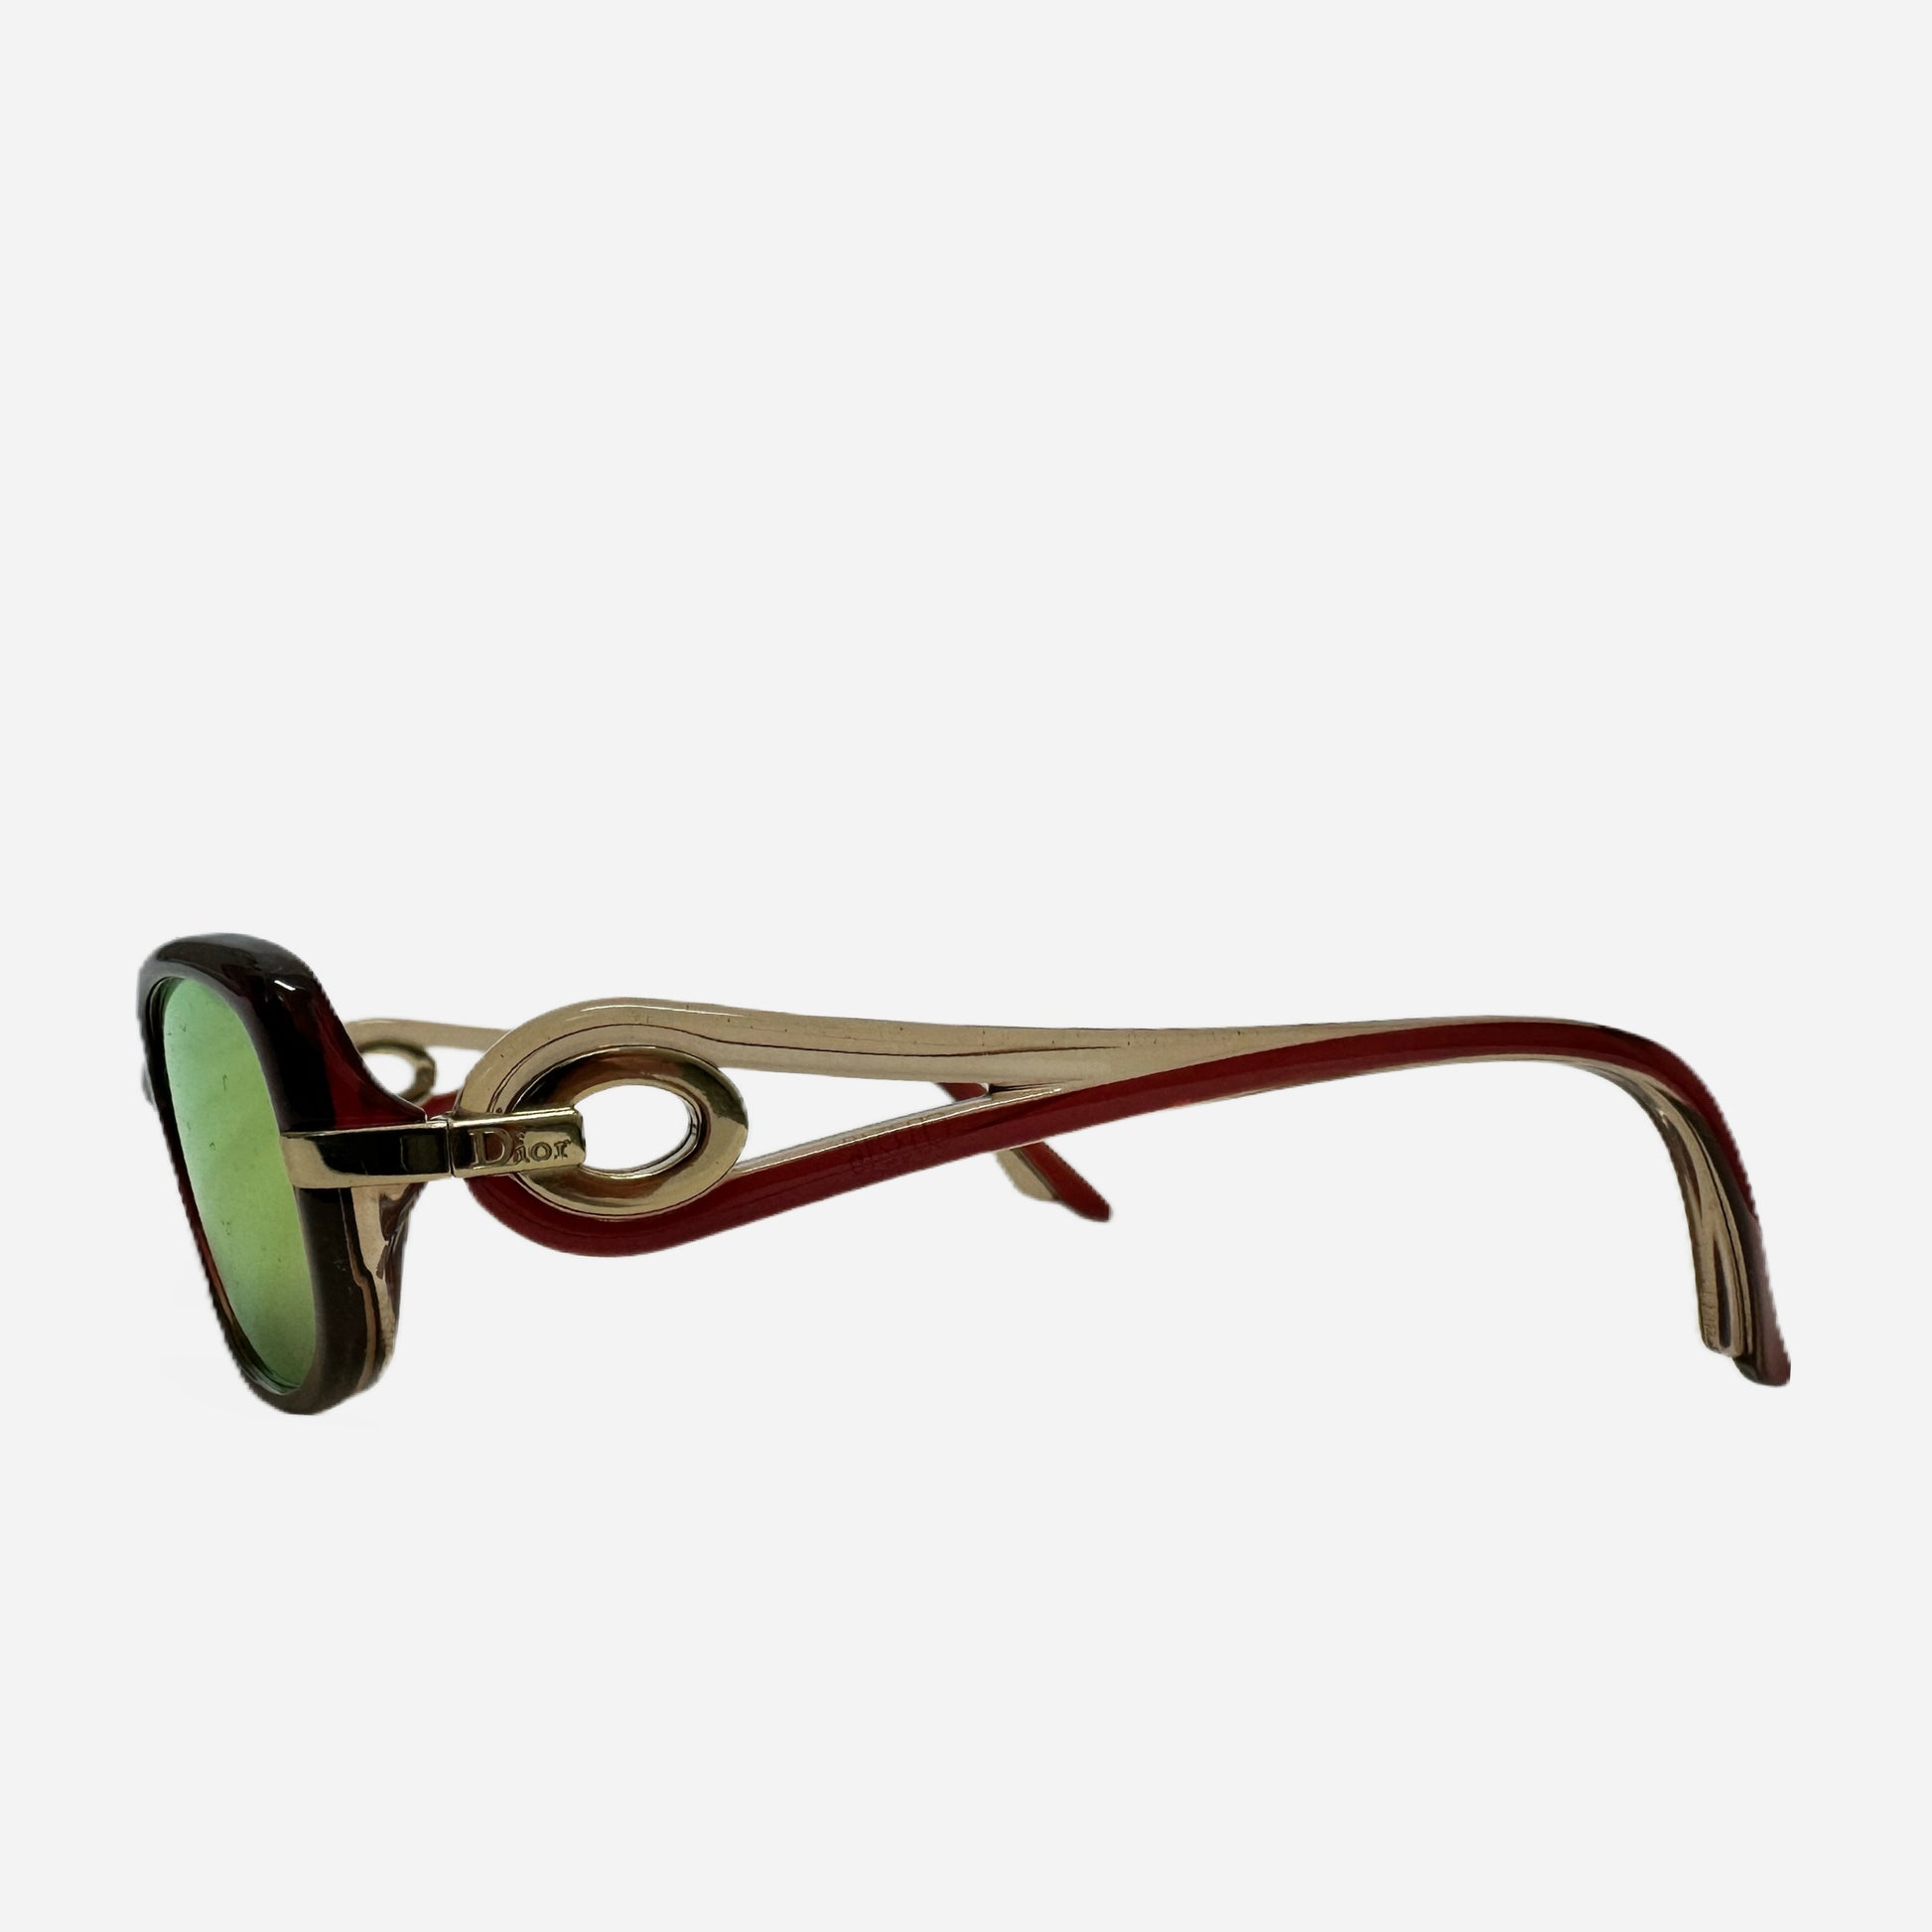 Vintage-Christian-Dior-Sonnenbrille-Sonnenbrille-3216-Optyl-The-Seekers-side